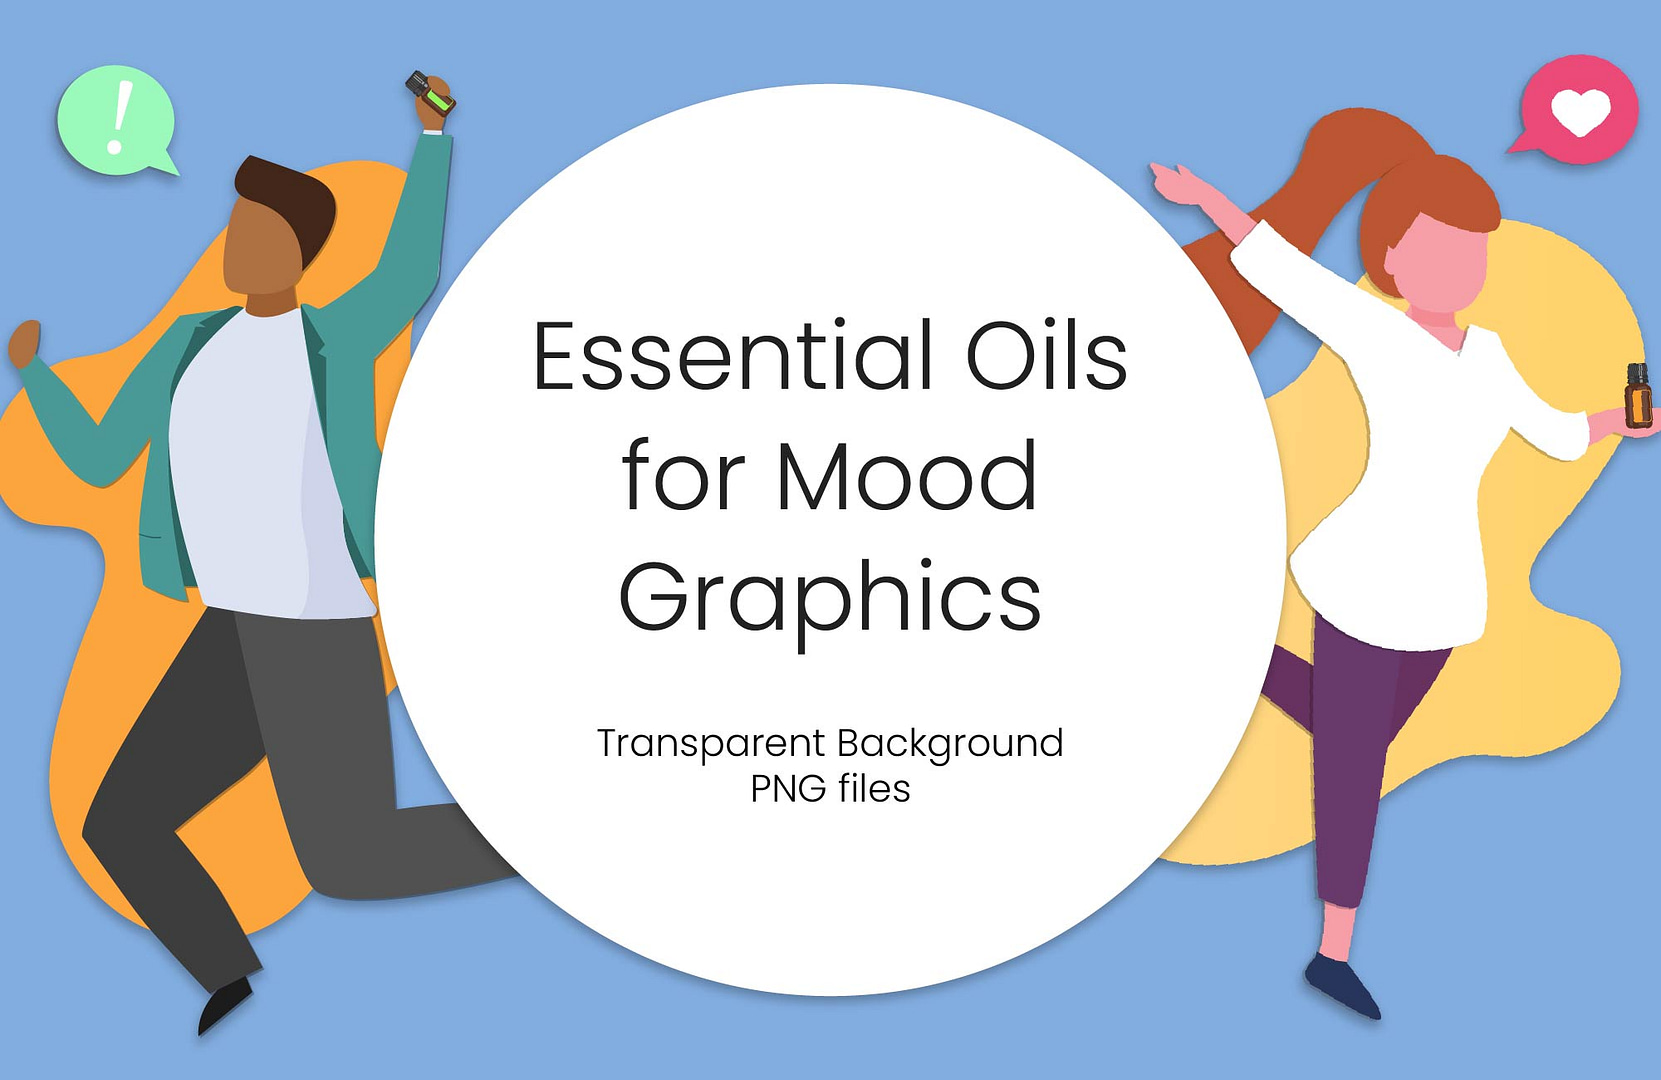 doTERRA essential oils for mood Graphics - Essential Oil Graphics - doTERRA Essential Oils